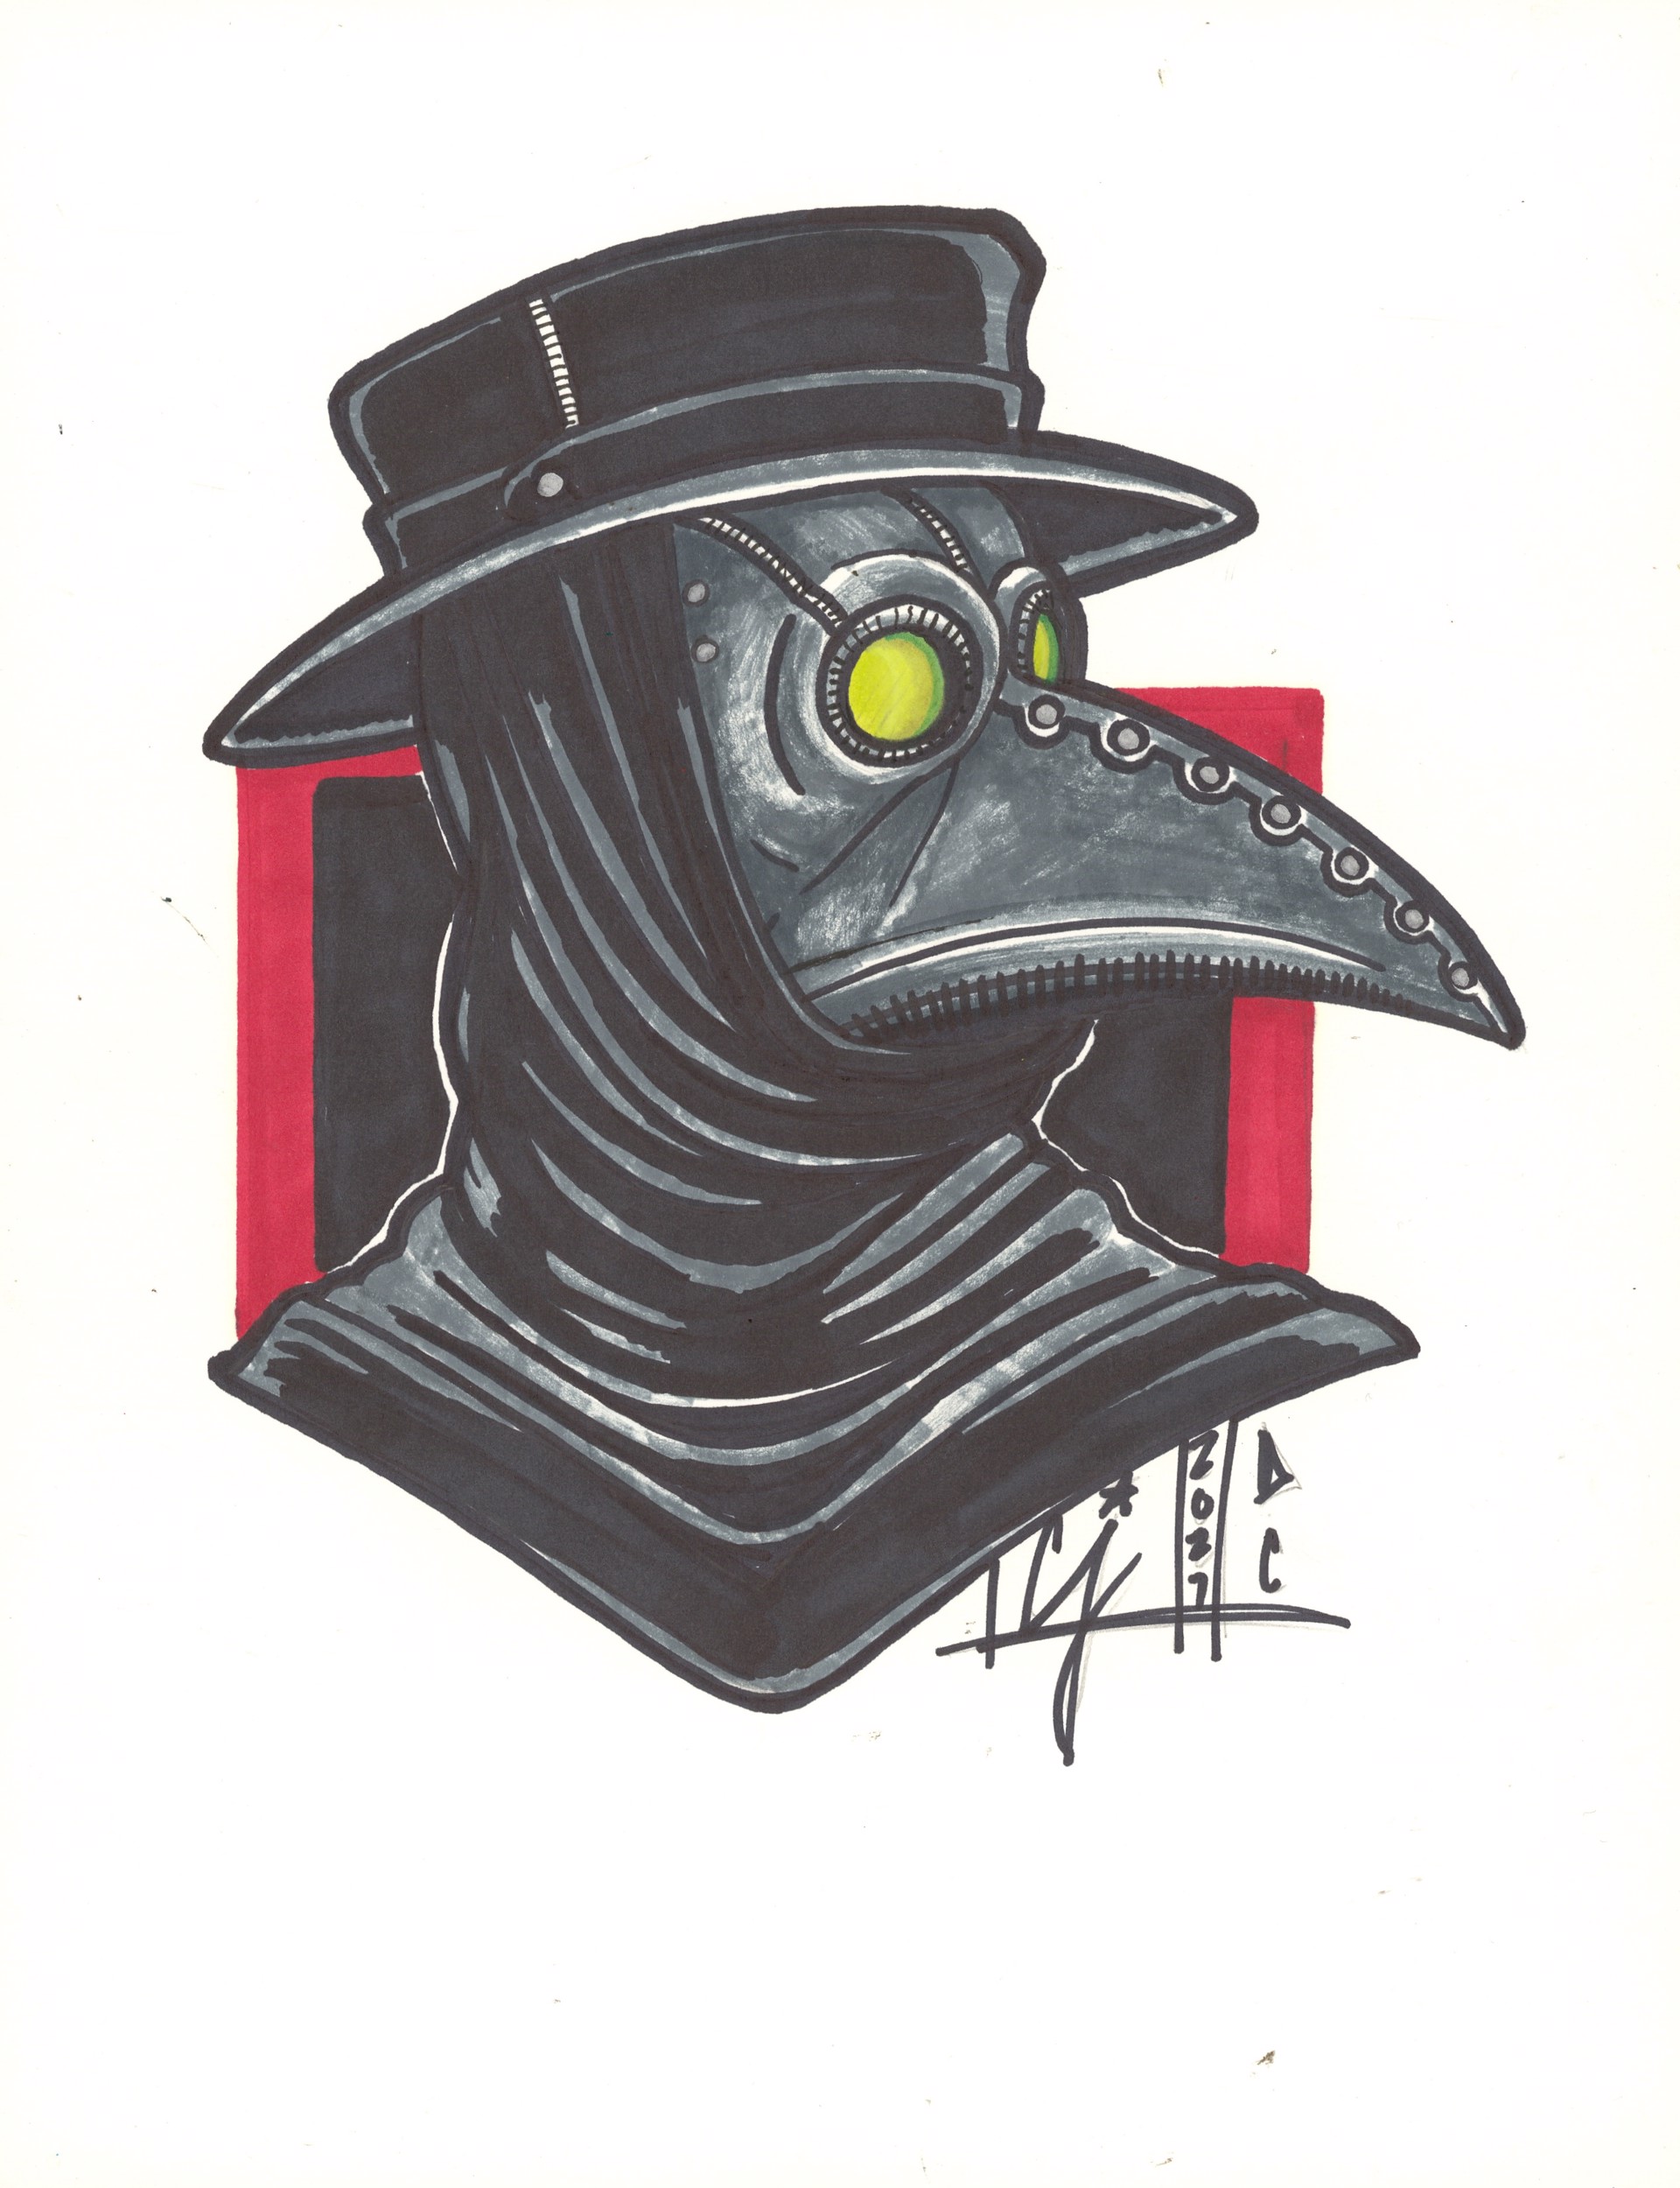 Plague Doctor by CeeJ Maples